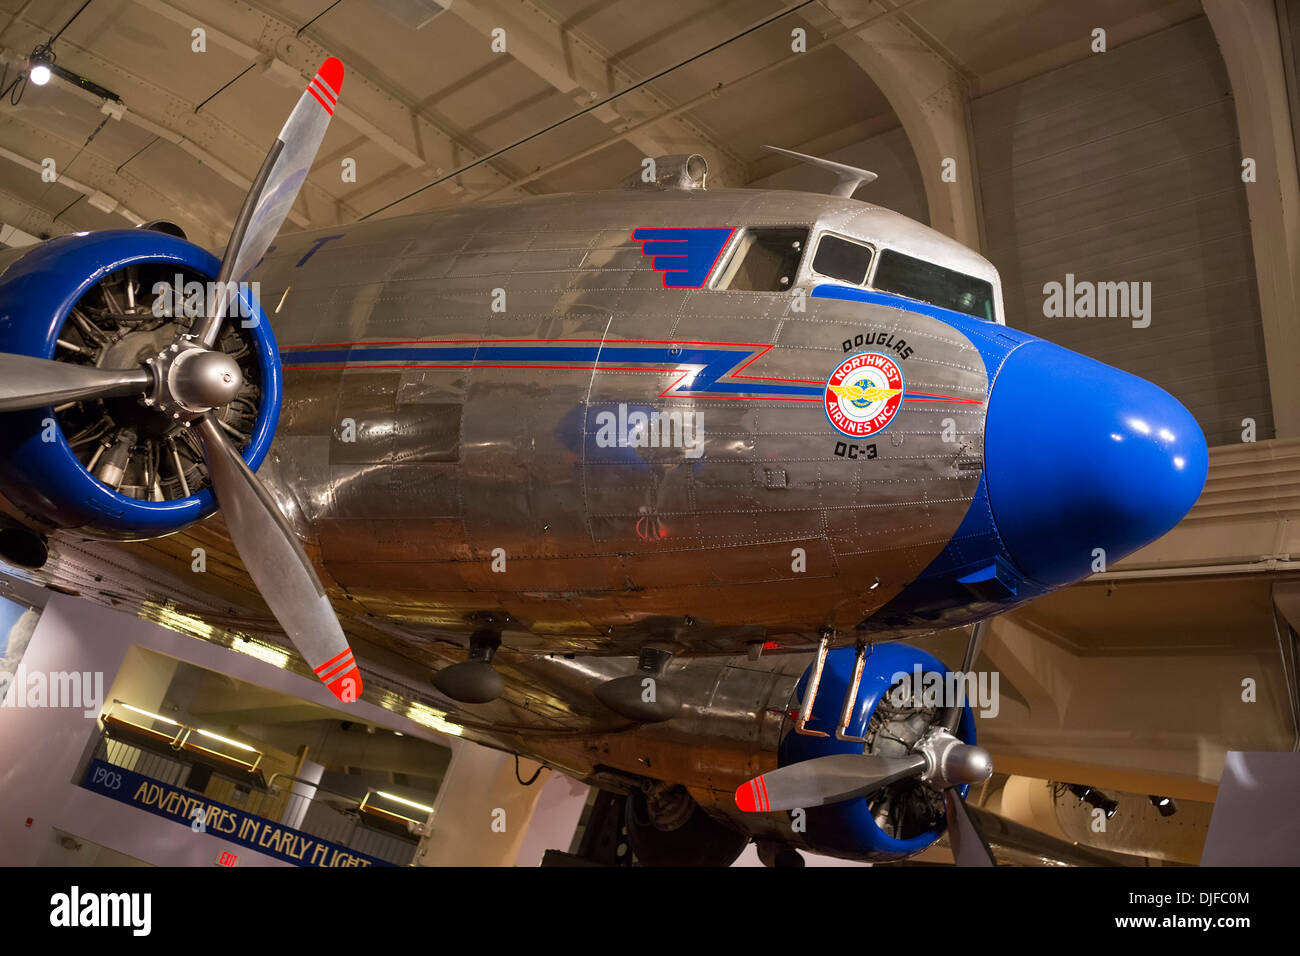 A Douglas DC-3 operated by Northwest Airlines on display at the Henry Ford Museum Stock Photo